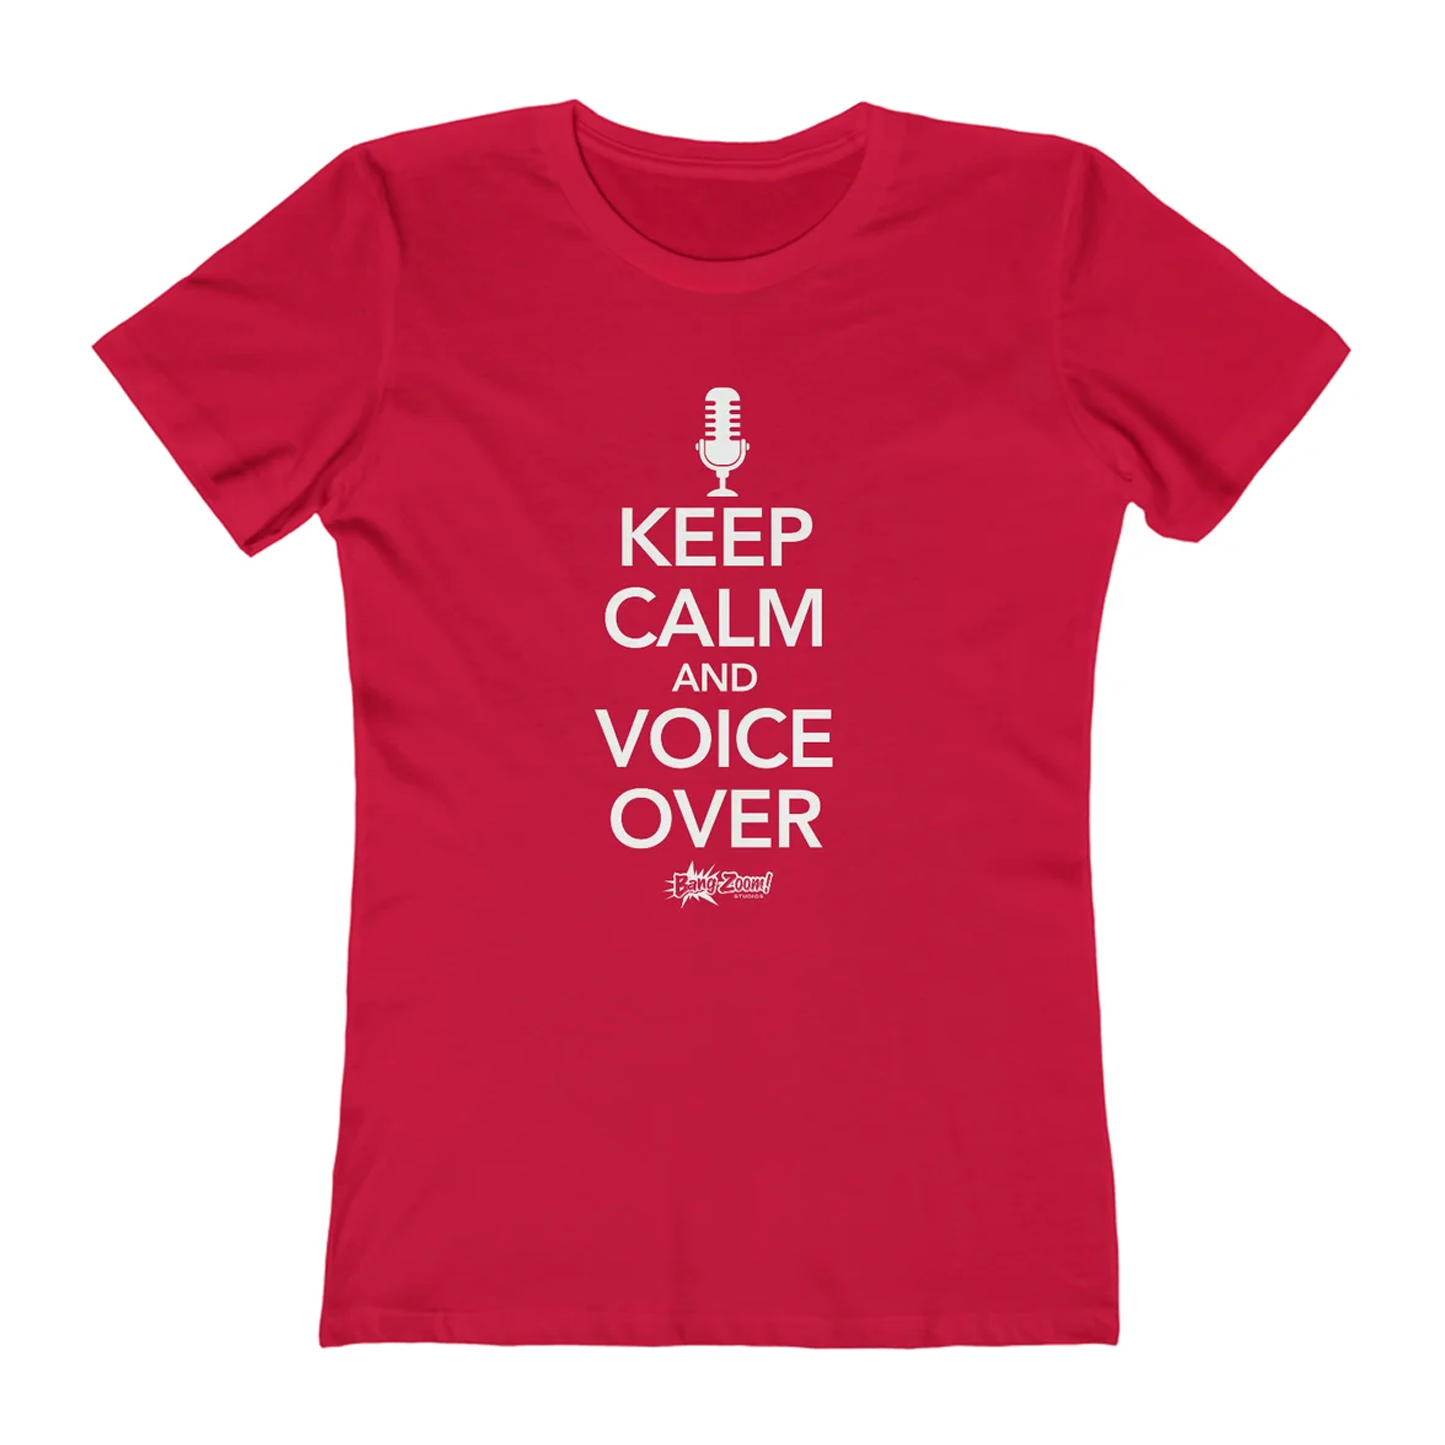 Women's "Keep Calm and Voice Over" Red Tee